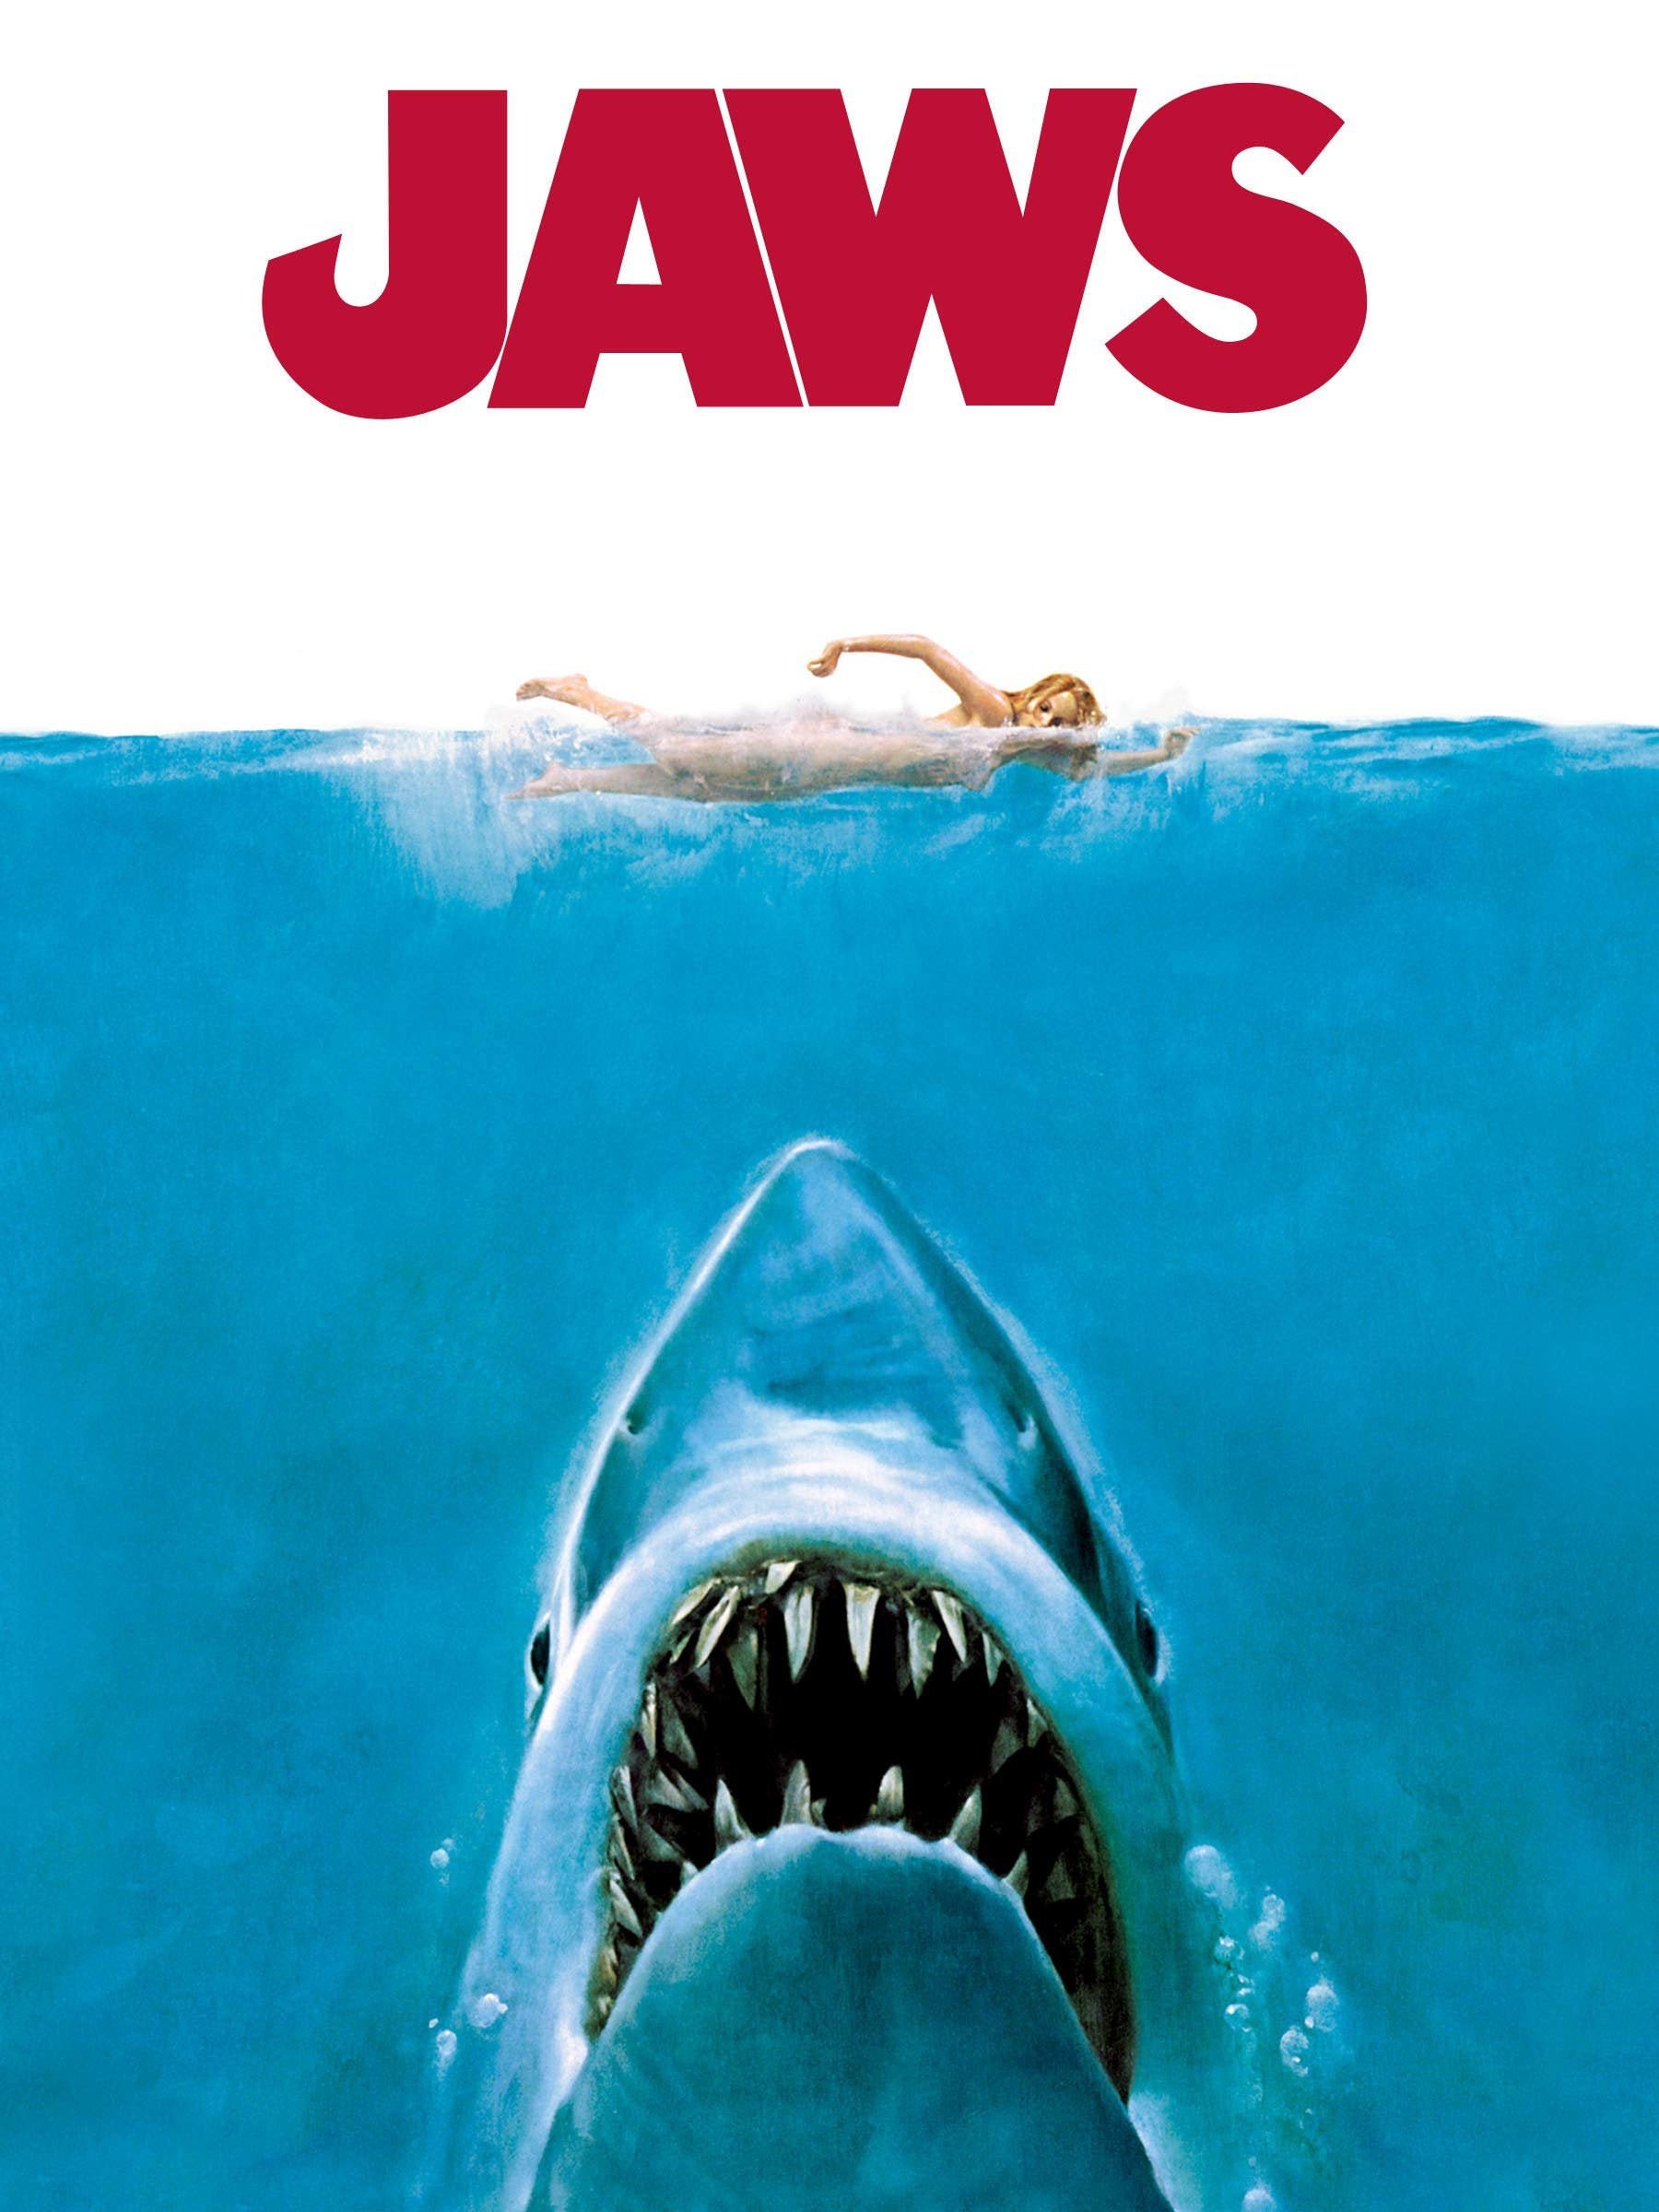 JAWS 1975 Movie Poster Print 19x 13 4031 | Etsy Canada